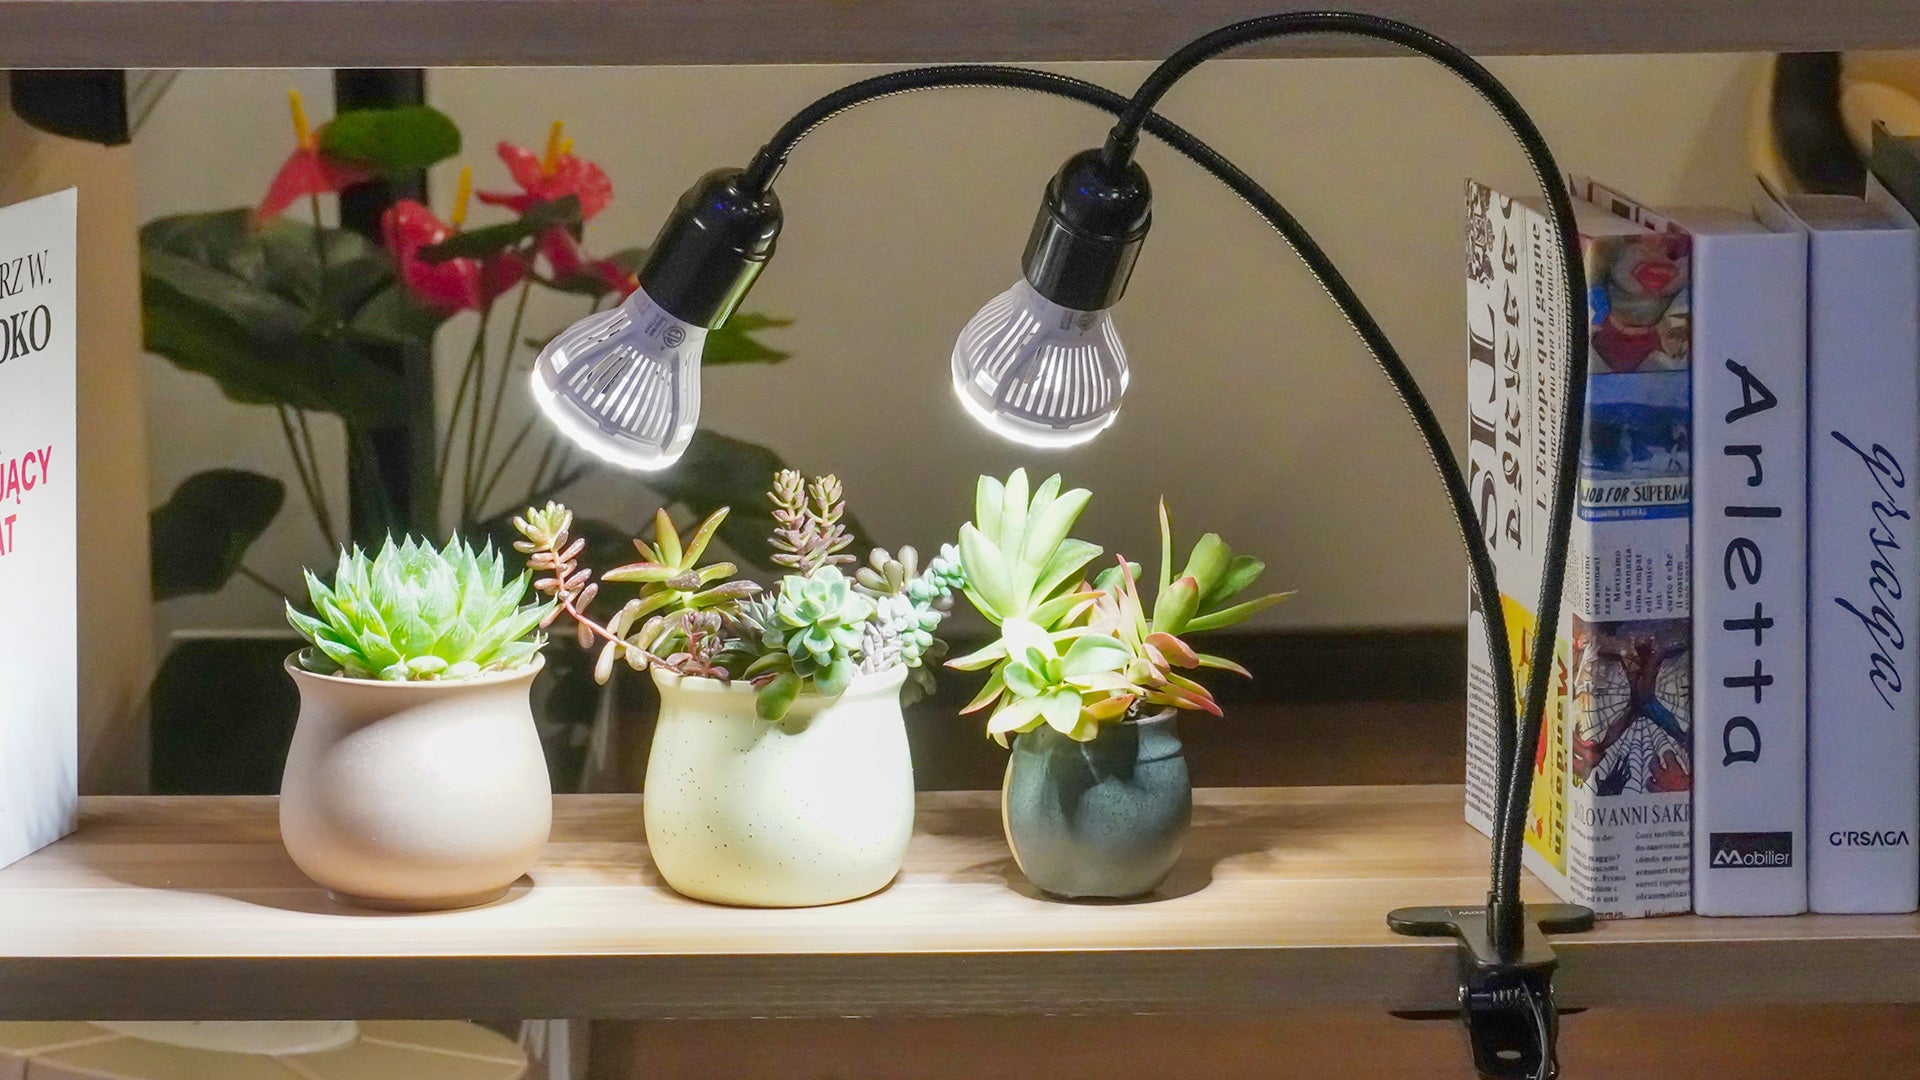 20W Adjustable 2-Head Clip-on LED Grow Light is clipped on the bookshelf, the light of the bulbs is on a pot of succulence, succulence grows healthily under the light of the lamps.